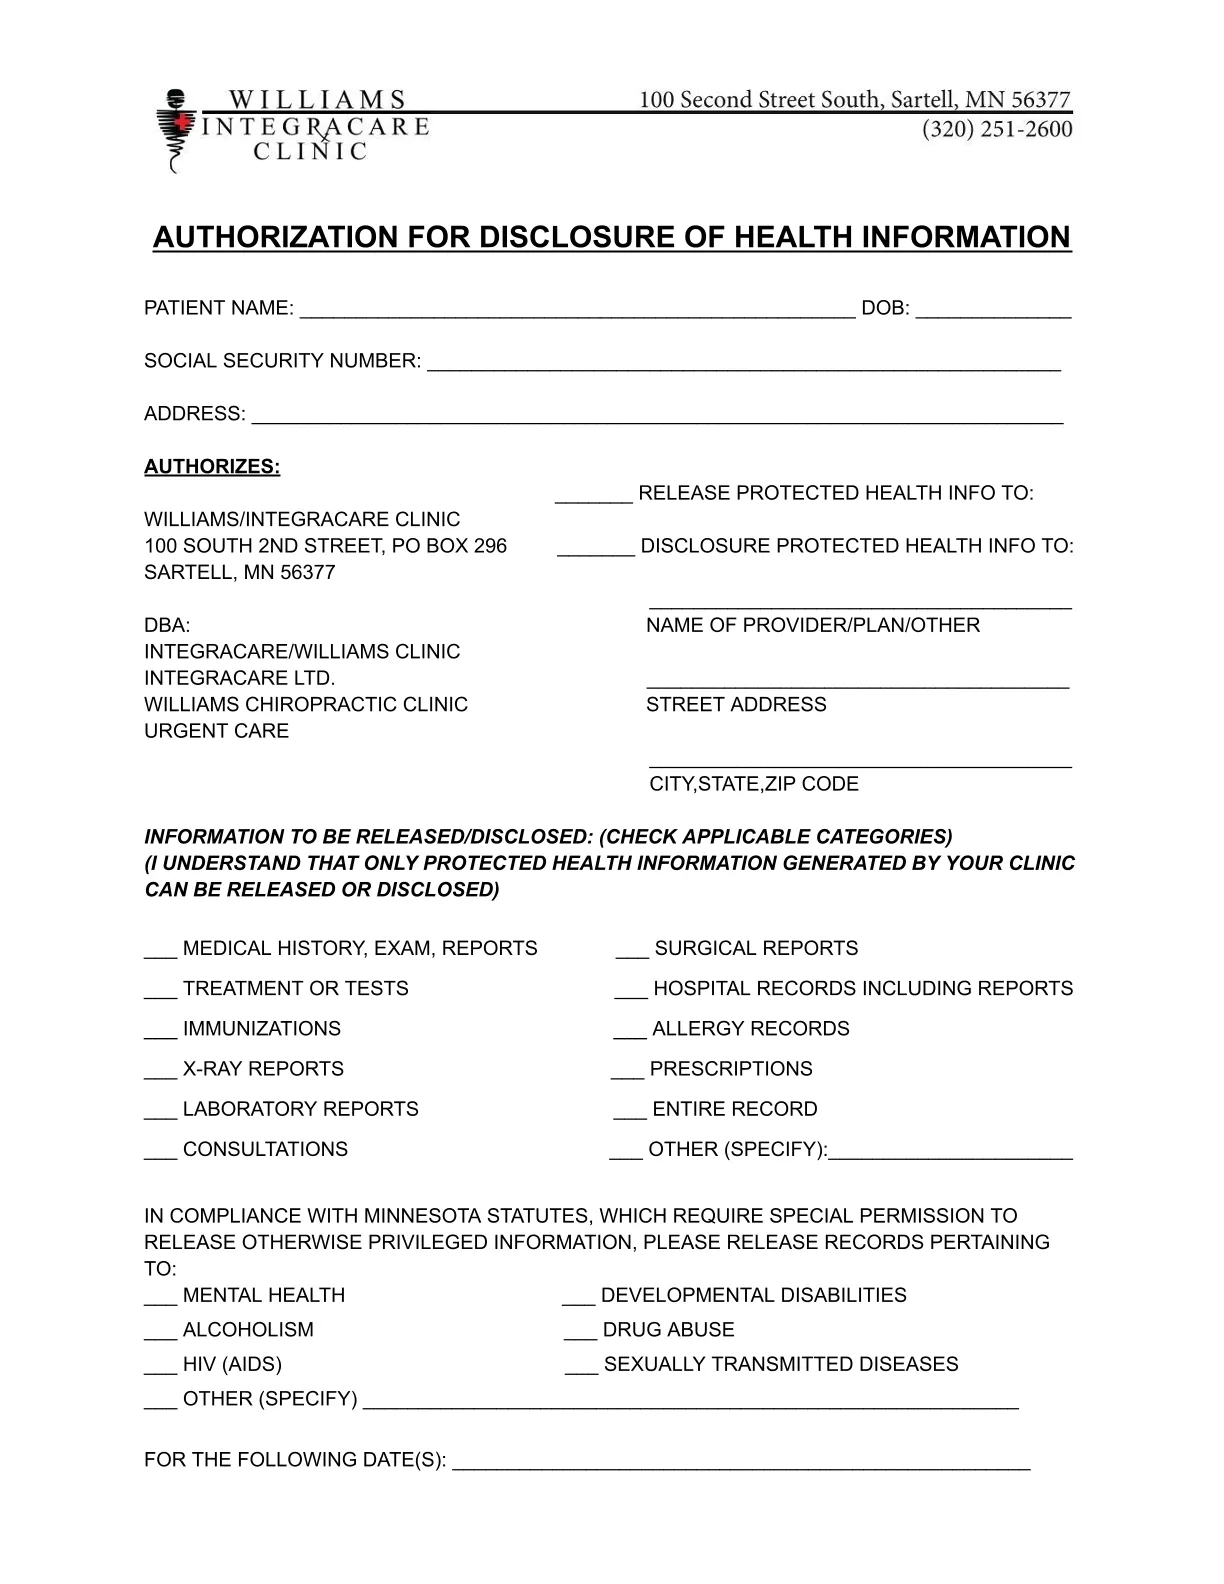 Authorization for Disclosure of Health Information - Sending OUT